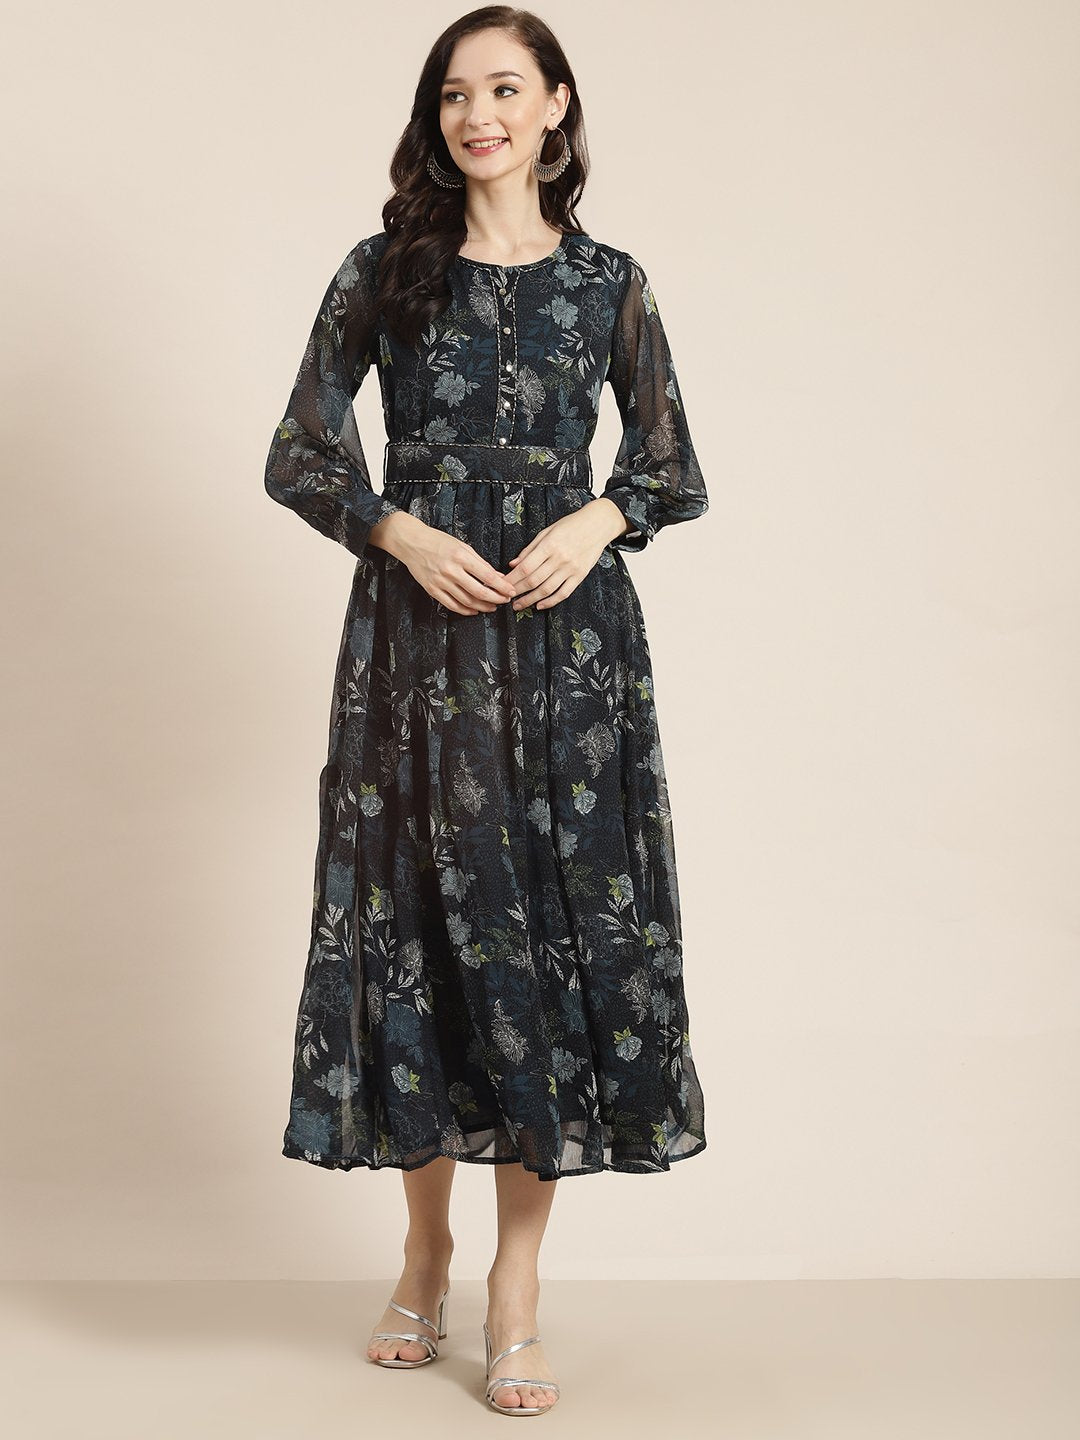 Women's Teal Chiffon Flared Printed Dress With Tie-up Blet - Juniper